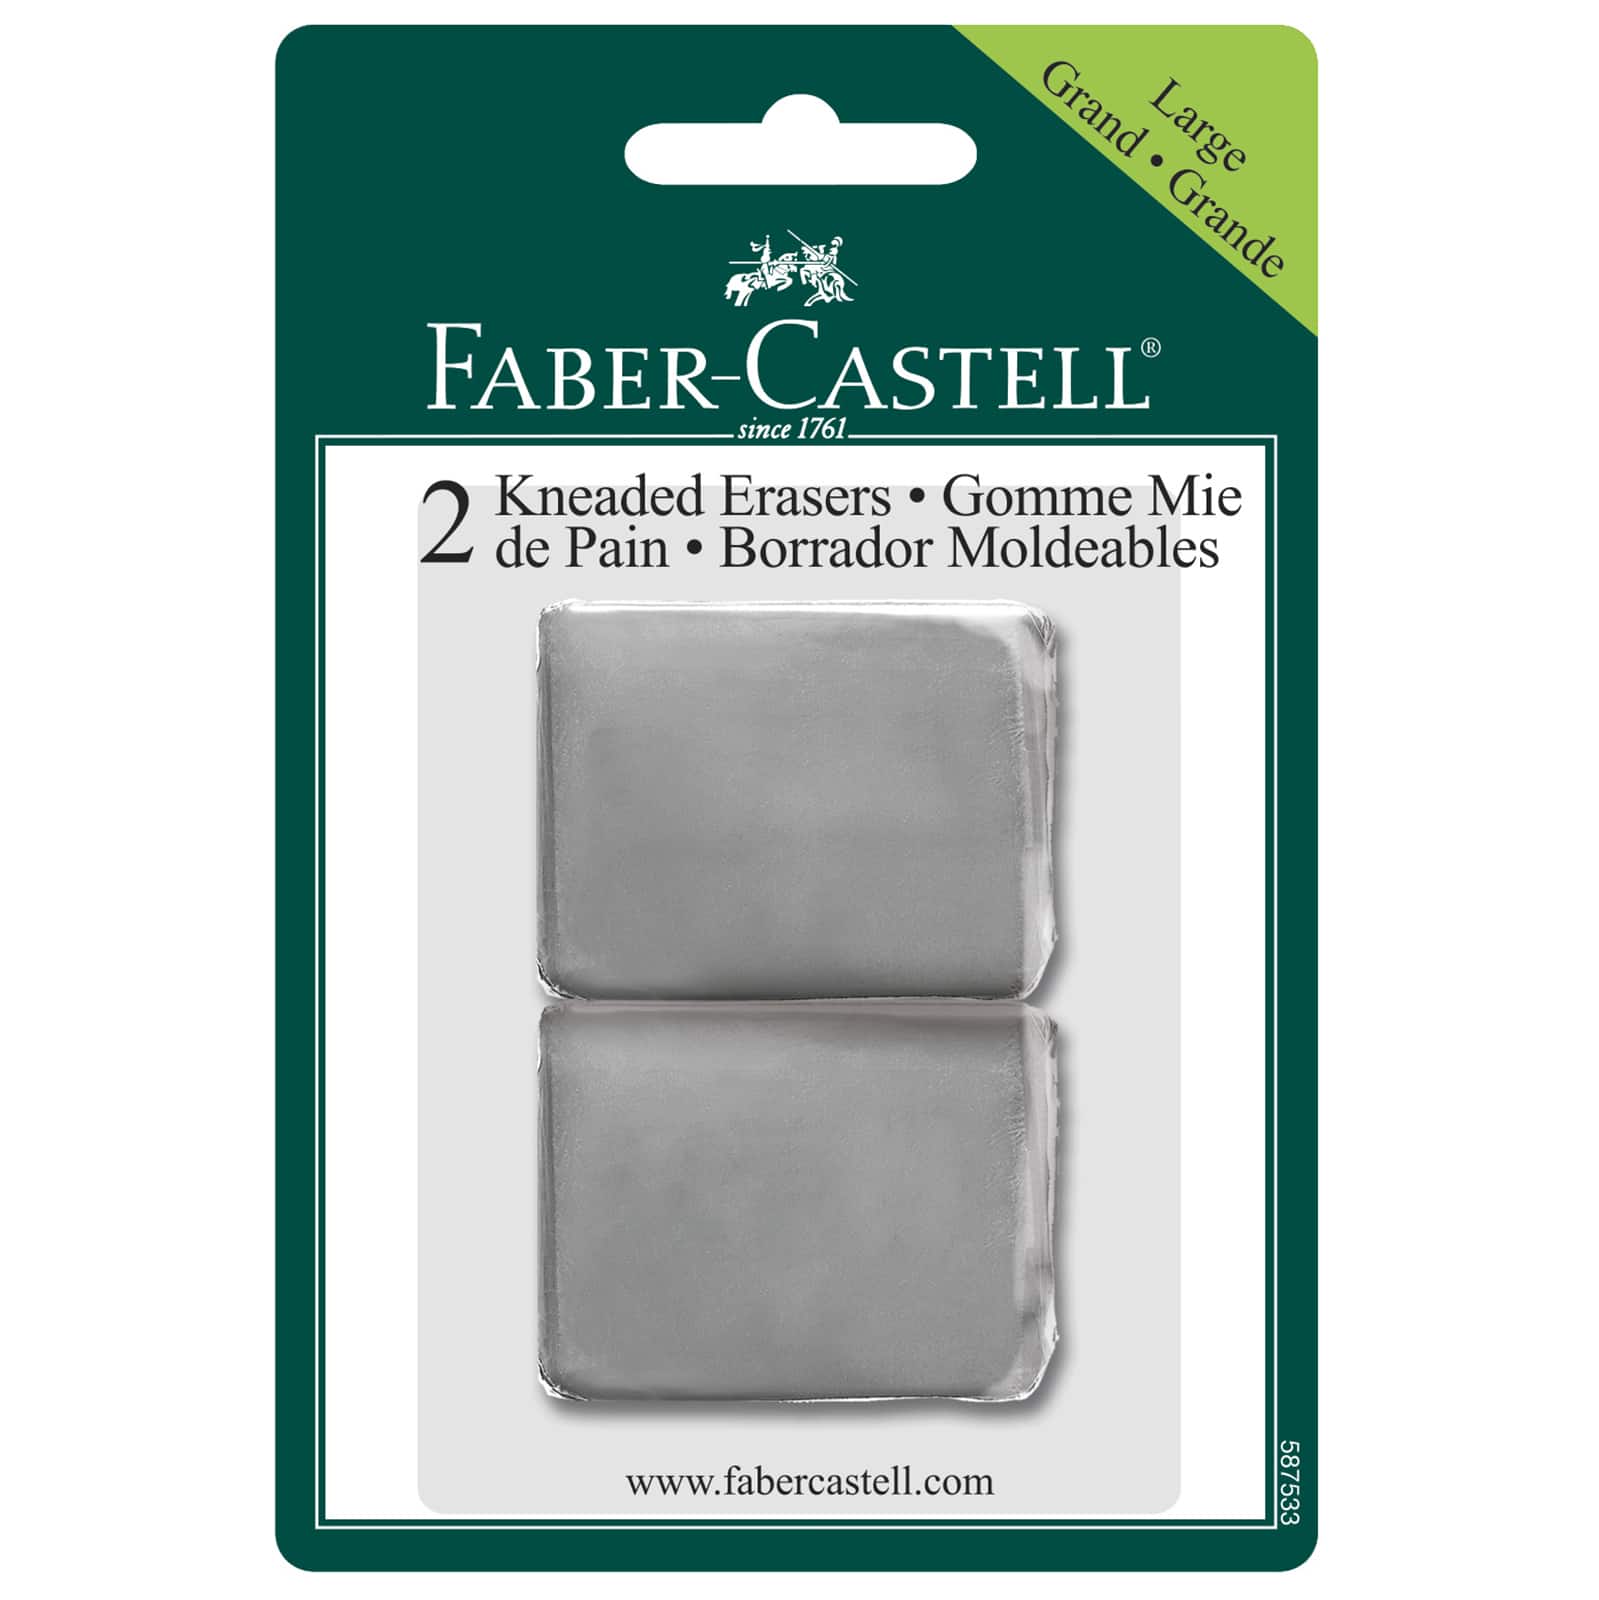 Faber-Castell® Kneaded Erasers